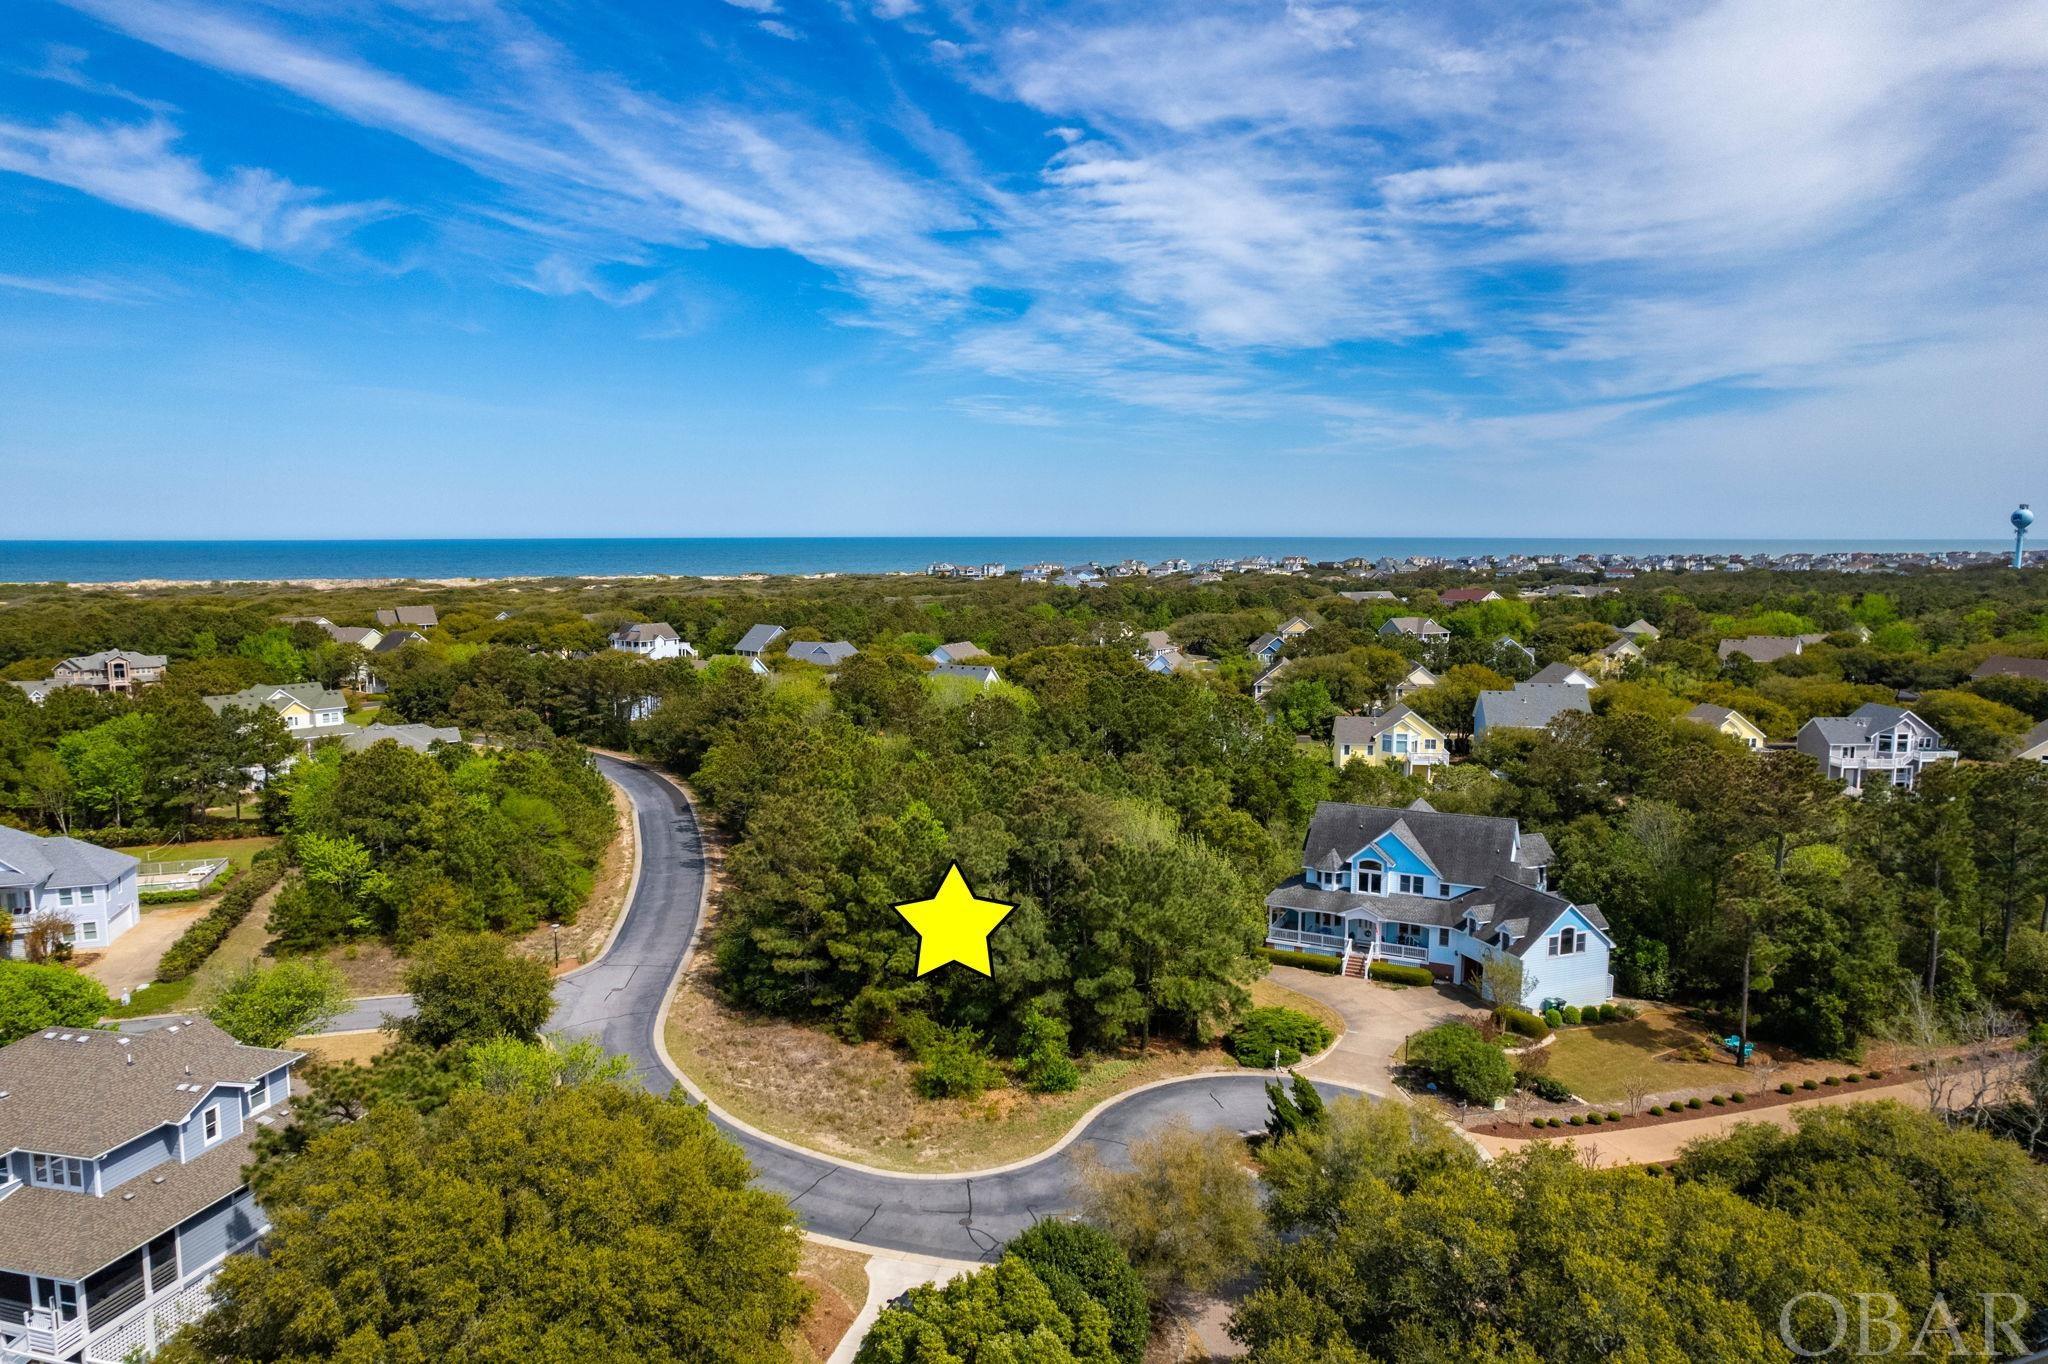 503 Brown Pelican Court, Corolla, NC 27927, ,Lots/land,For sale,Brown Pelican Court,125288